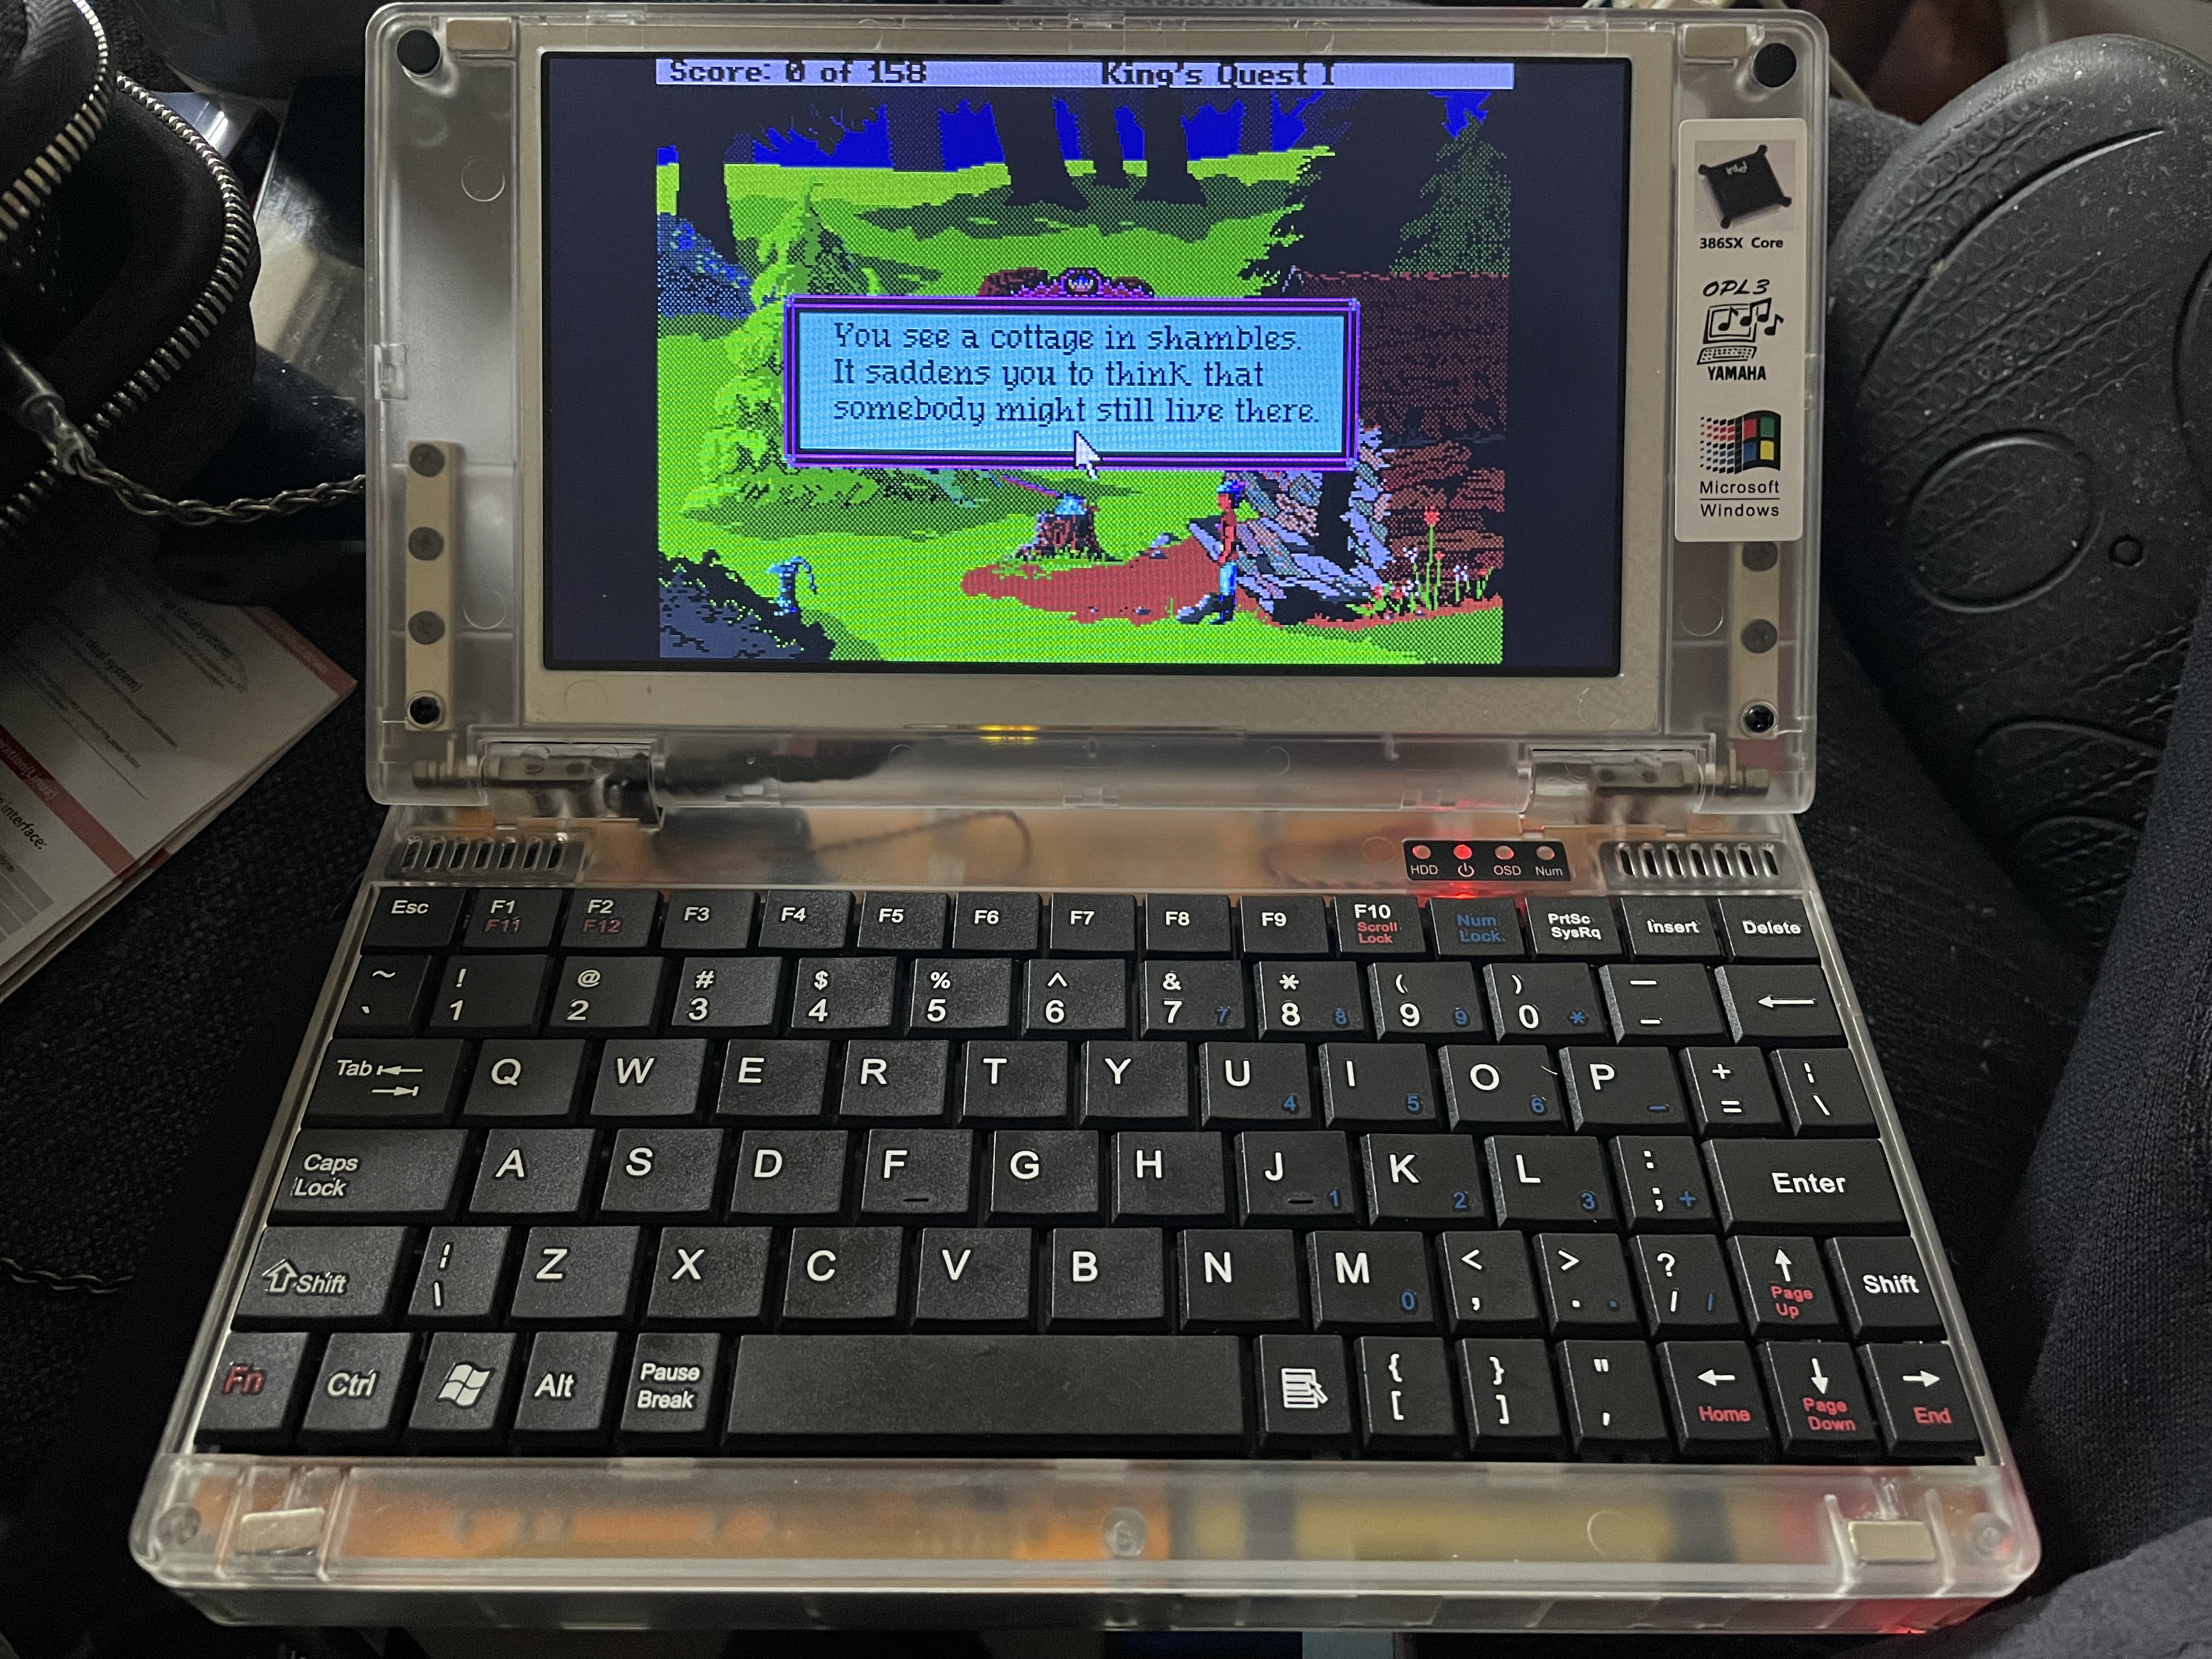 King’s Quest 1 VGA running on a Pocket 386 laptop. The screen shows Graham outside a dilapidated cottage in a forest. 